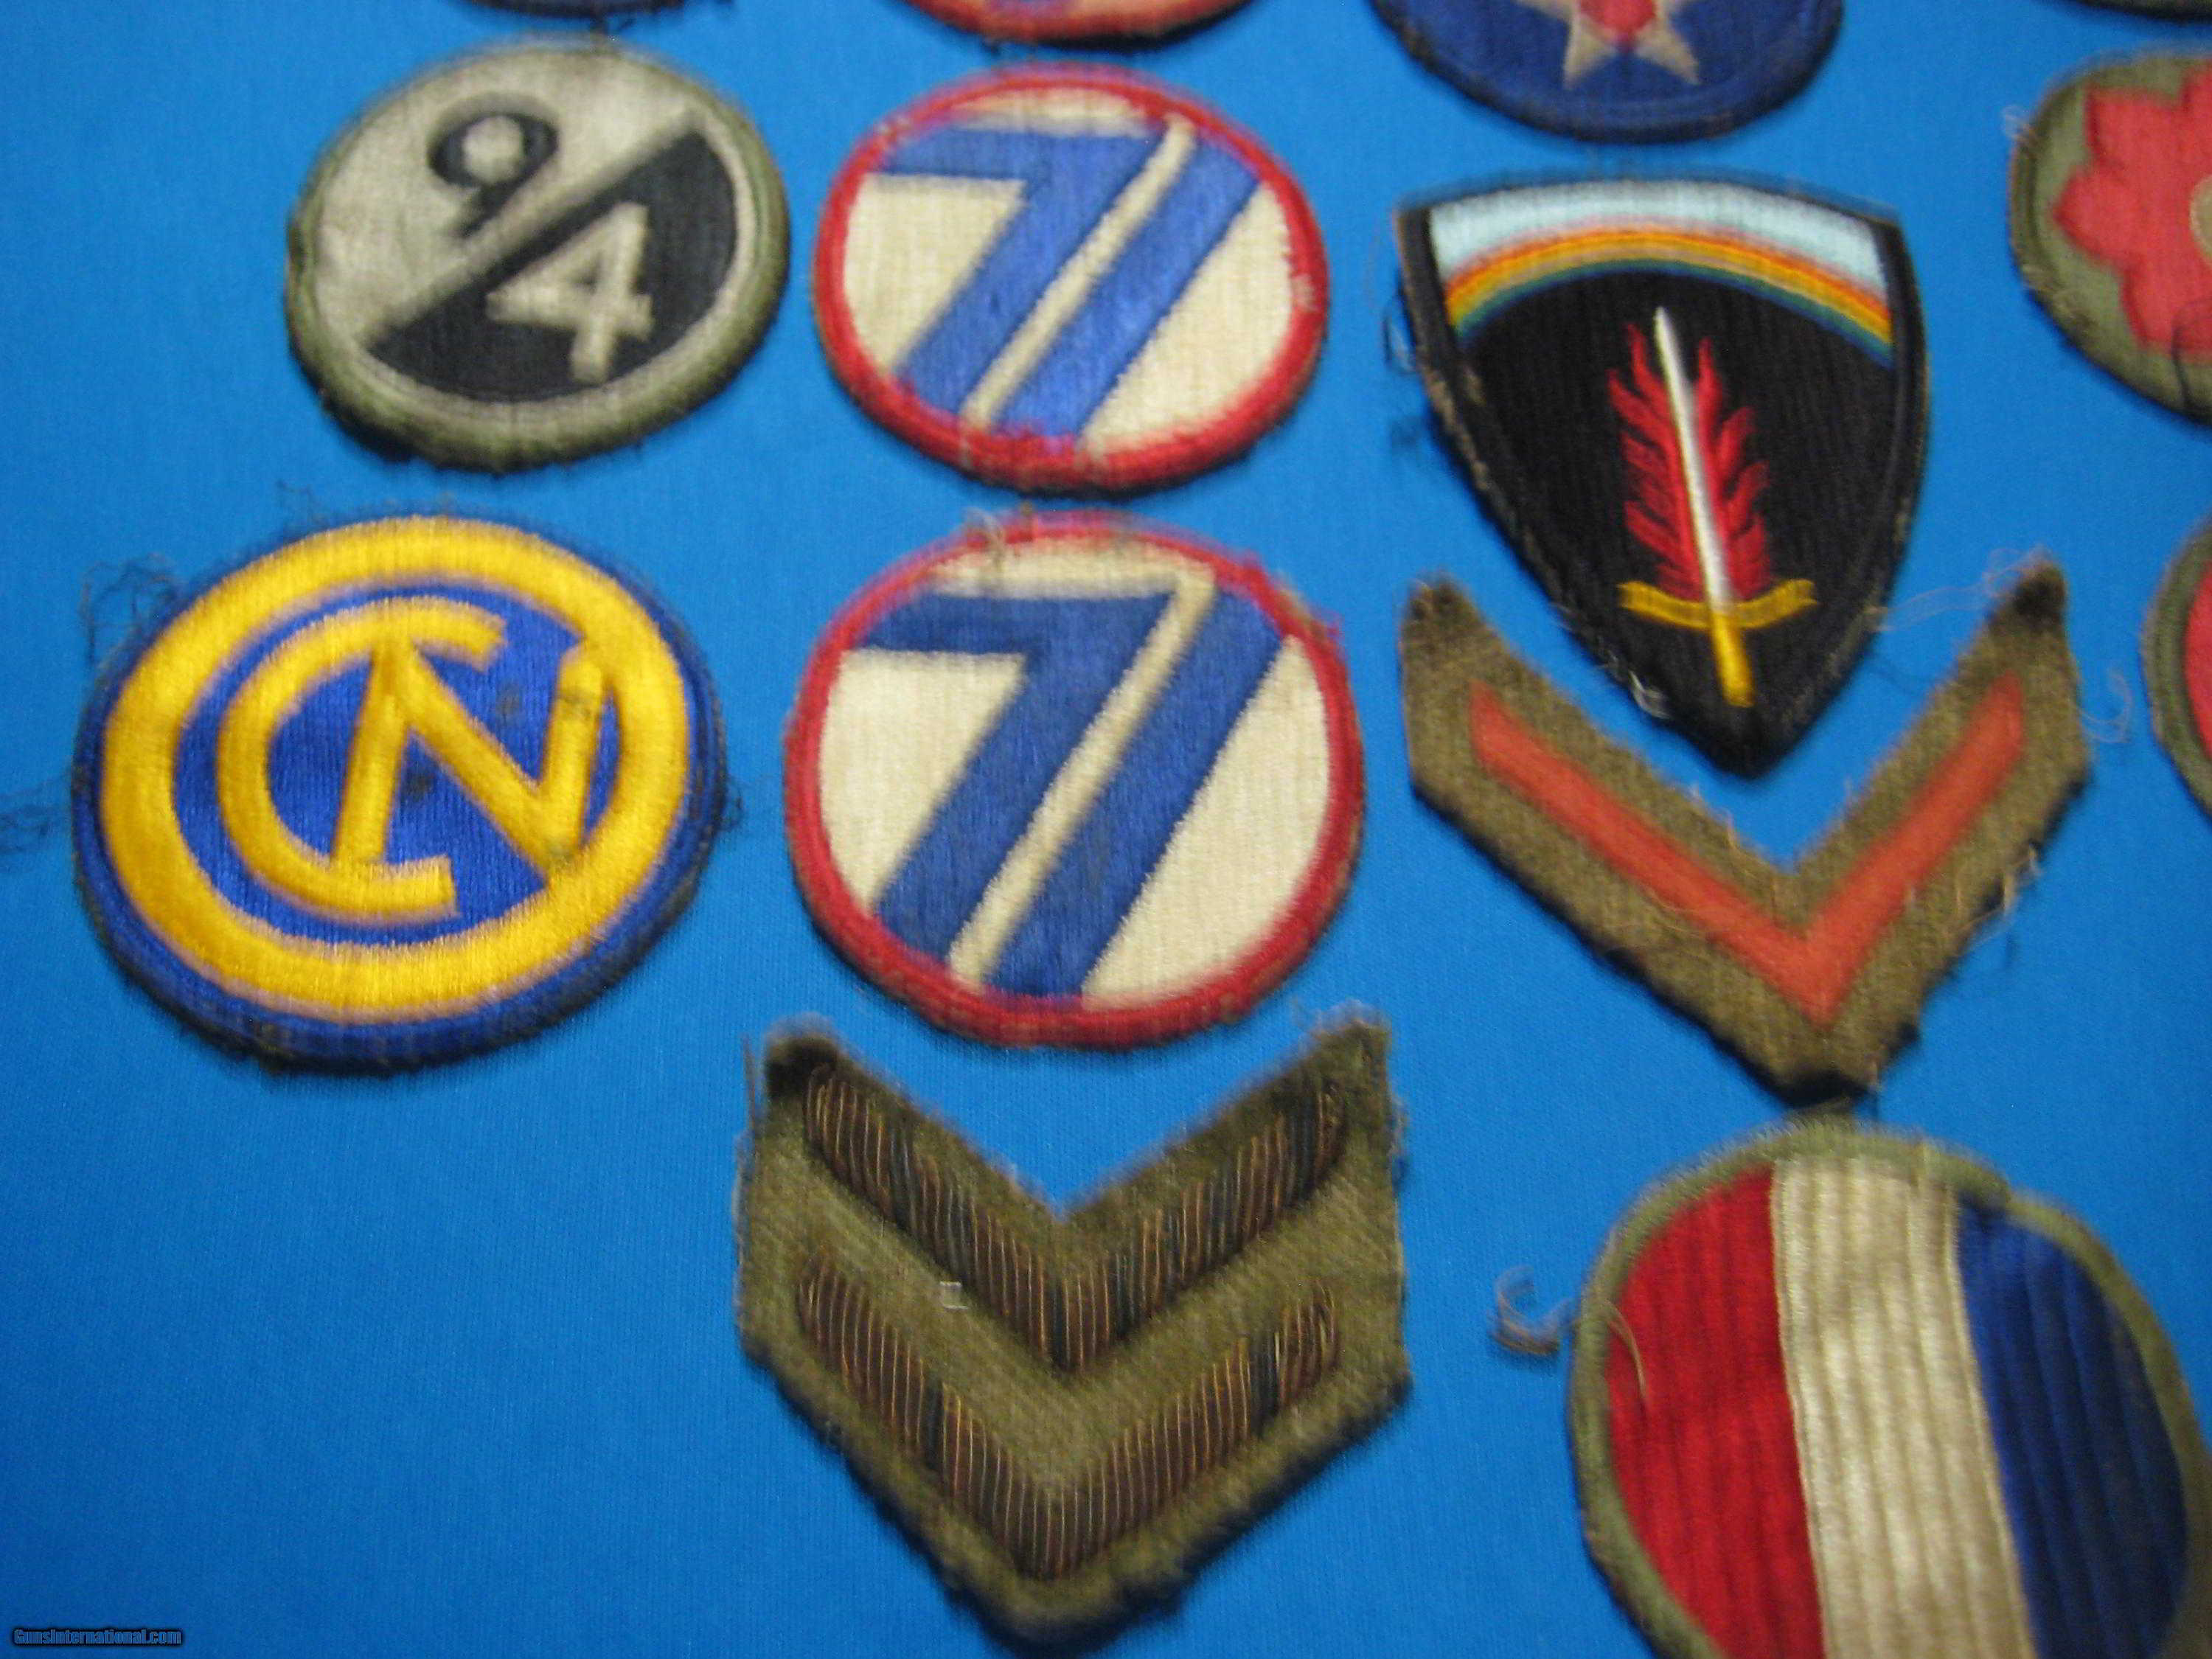 U.S. WW2 Army Division Patches for sale